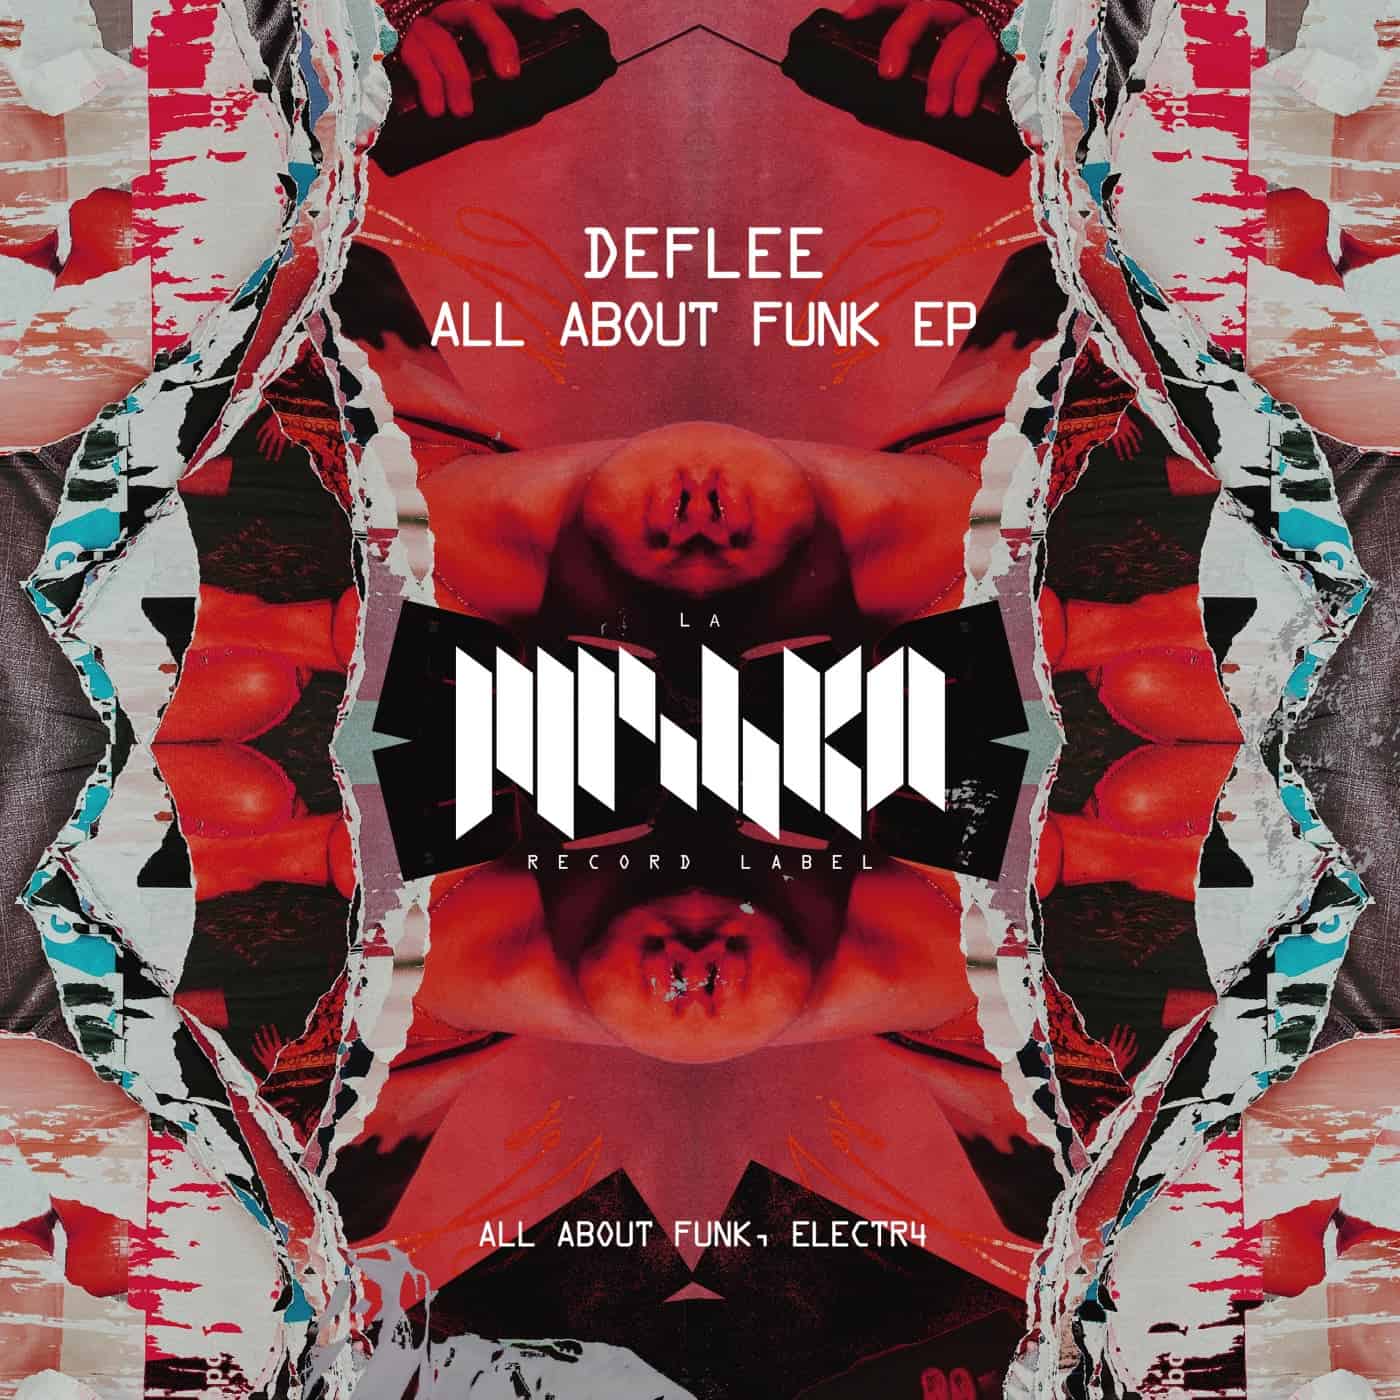 Download DEFLEE - All About Funk on Electrobuzz